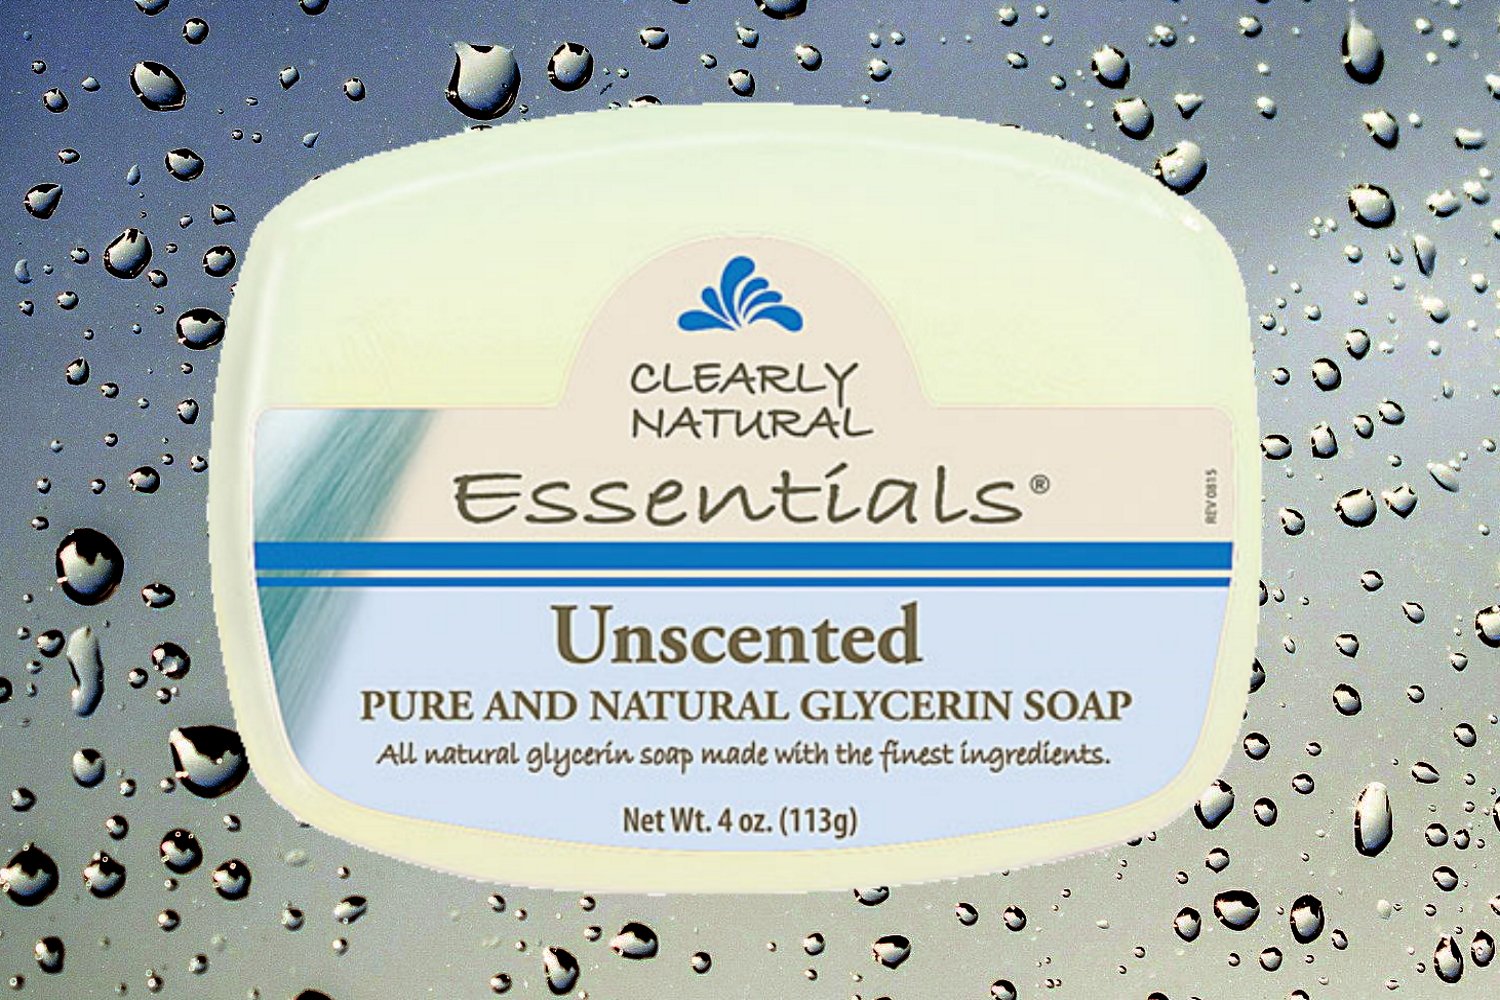 Clearly Natural Essentials unscented glycerin soap, with raindrops in the background.